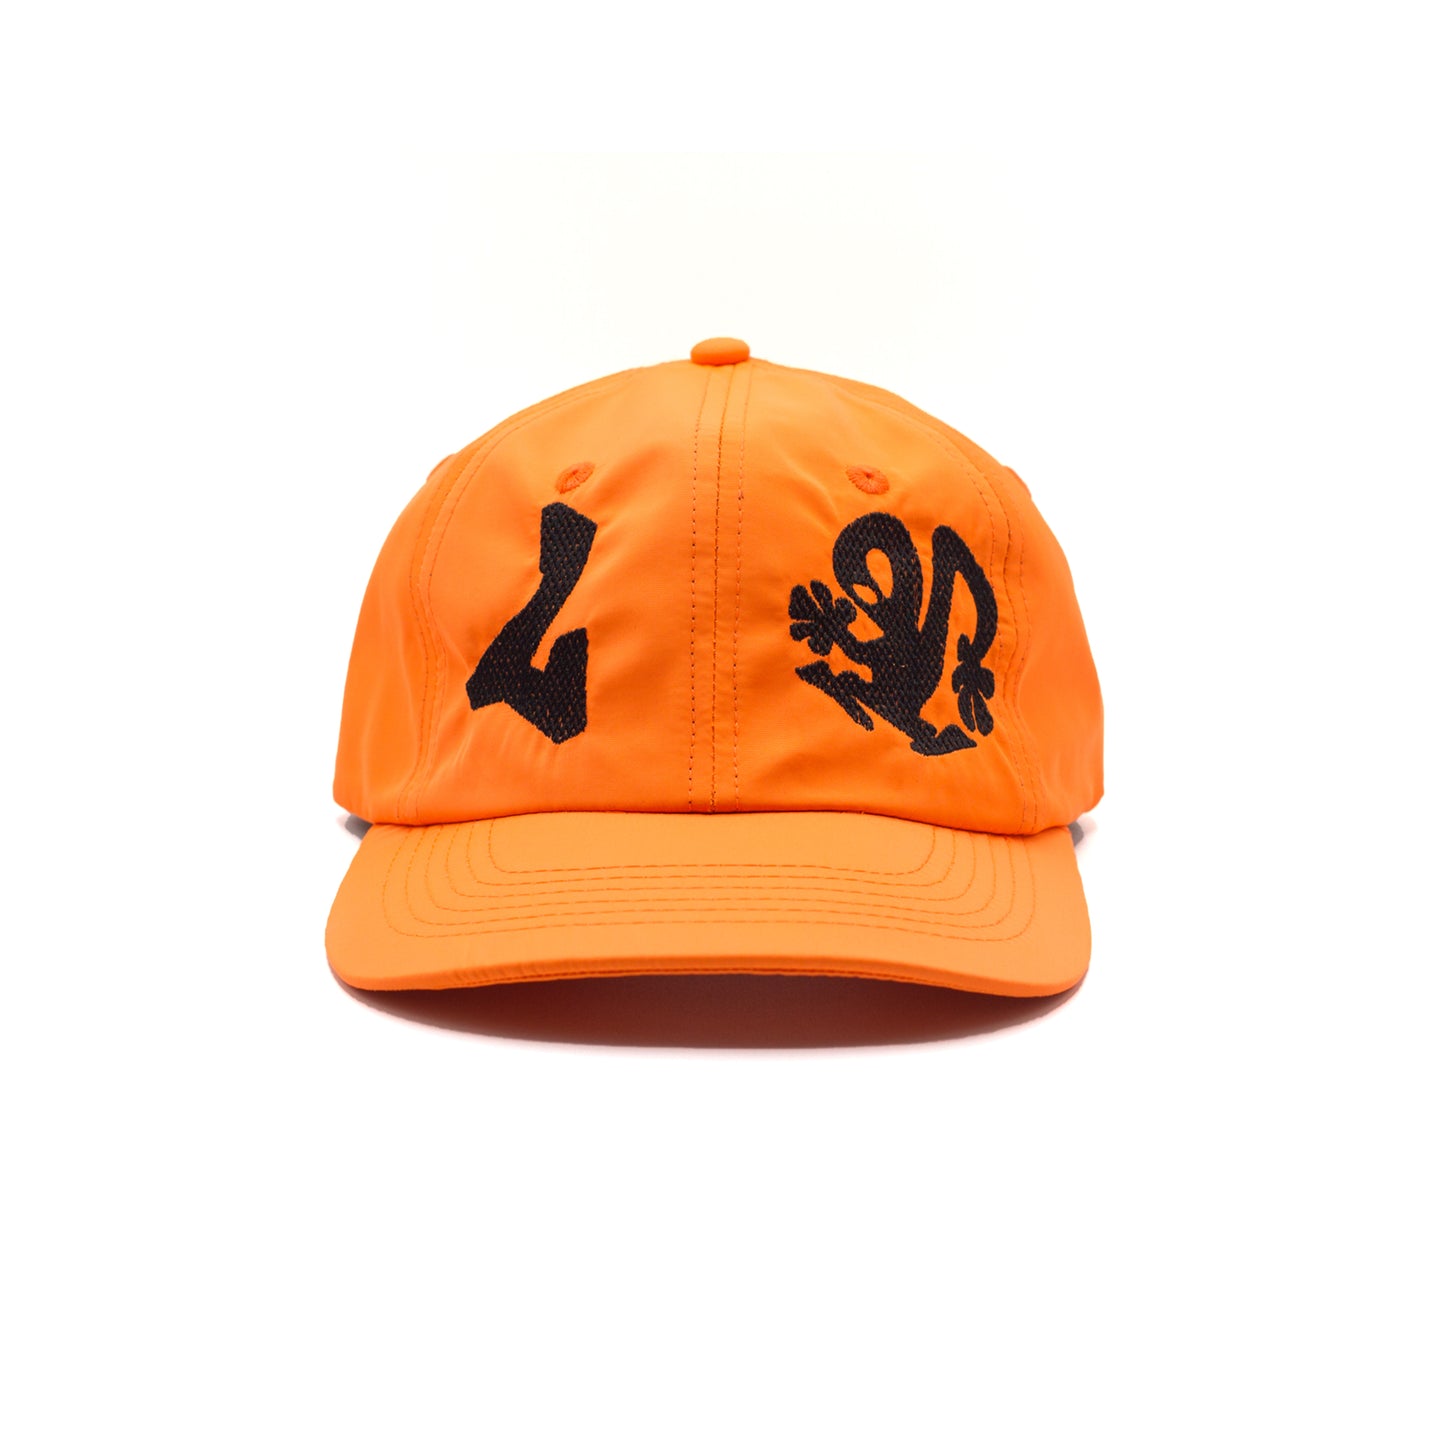 L GRAY ALIEN NEON OG HAND-MADE NYLON CAP, Hand-made paneled recycled nylon taffeta cap in neon orange with black embroidery, EDITION OF 8, LMTD PLASTIKMAN CAP, PLASTIKMAN CAP, PLASTIKMAN NYLON CAP